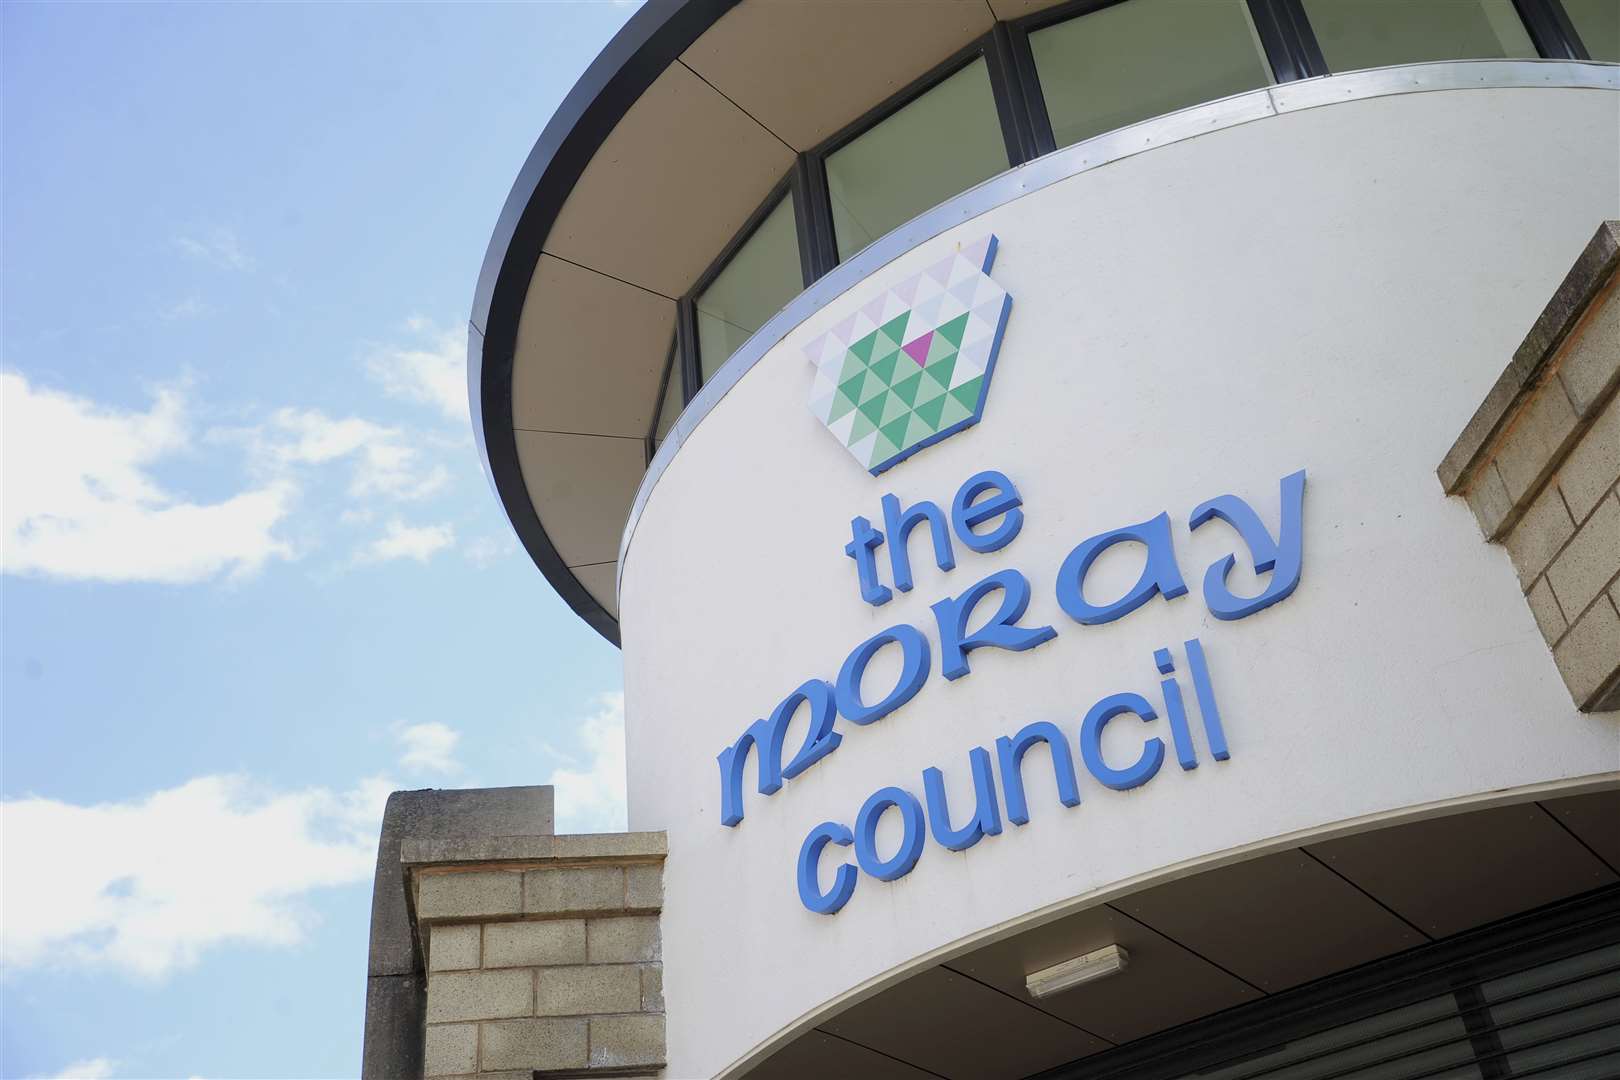 Moray Council is contacting those who are shielded to establish the level of ongoing support.